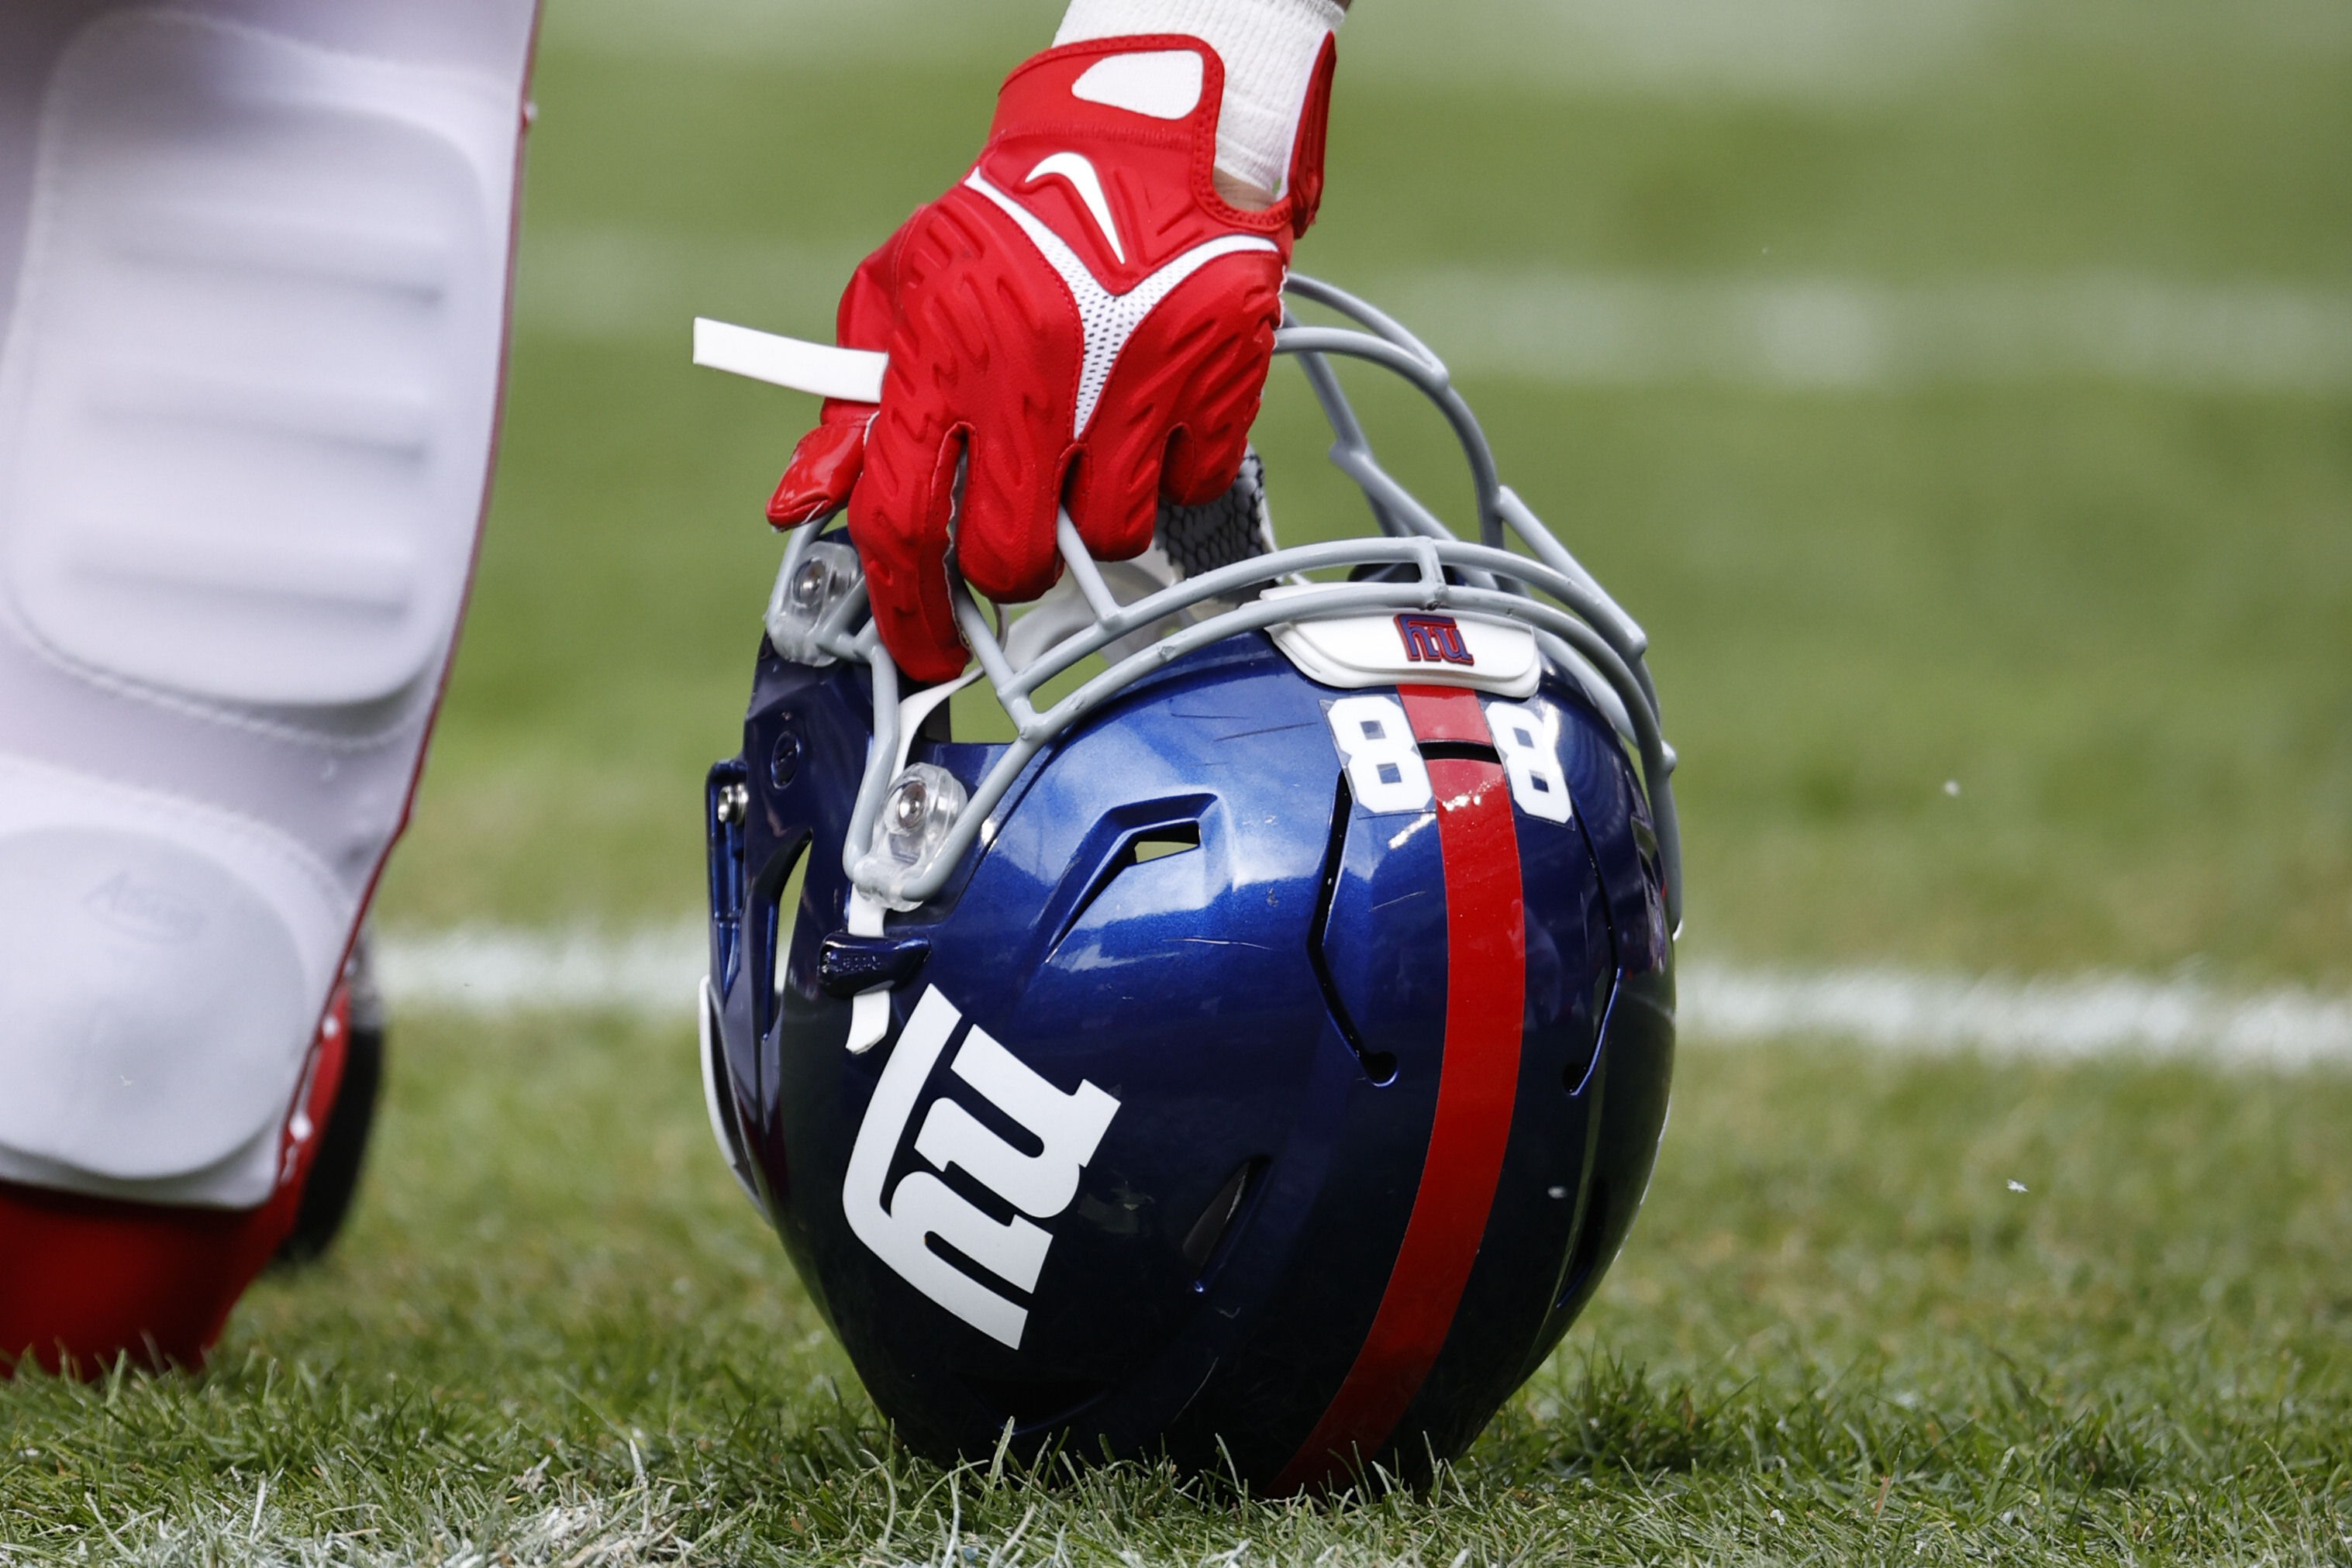 Why New York Giants Should Play a Game in 'Throwback' Uniforms